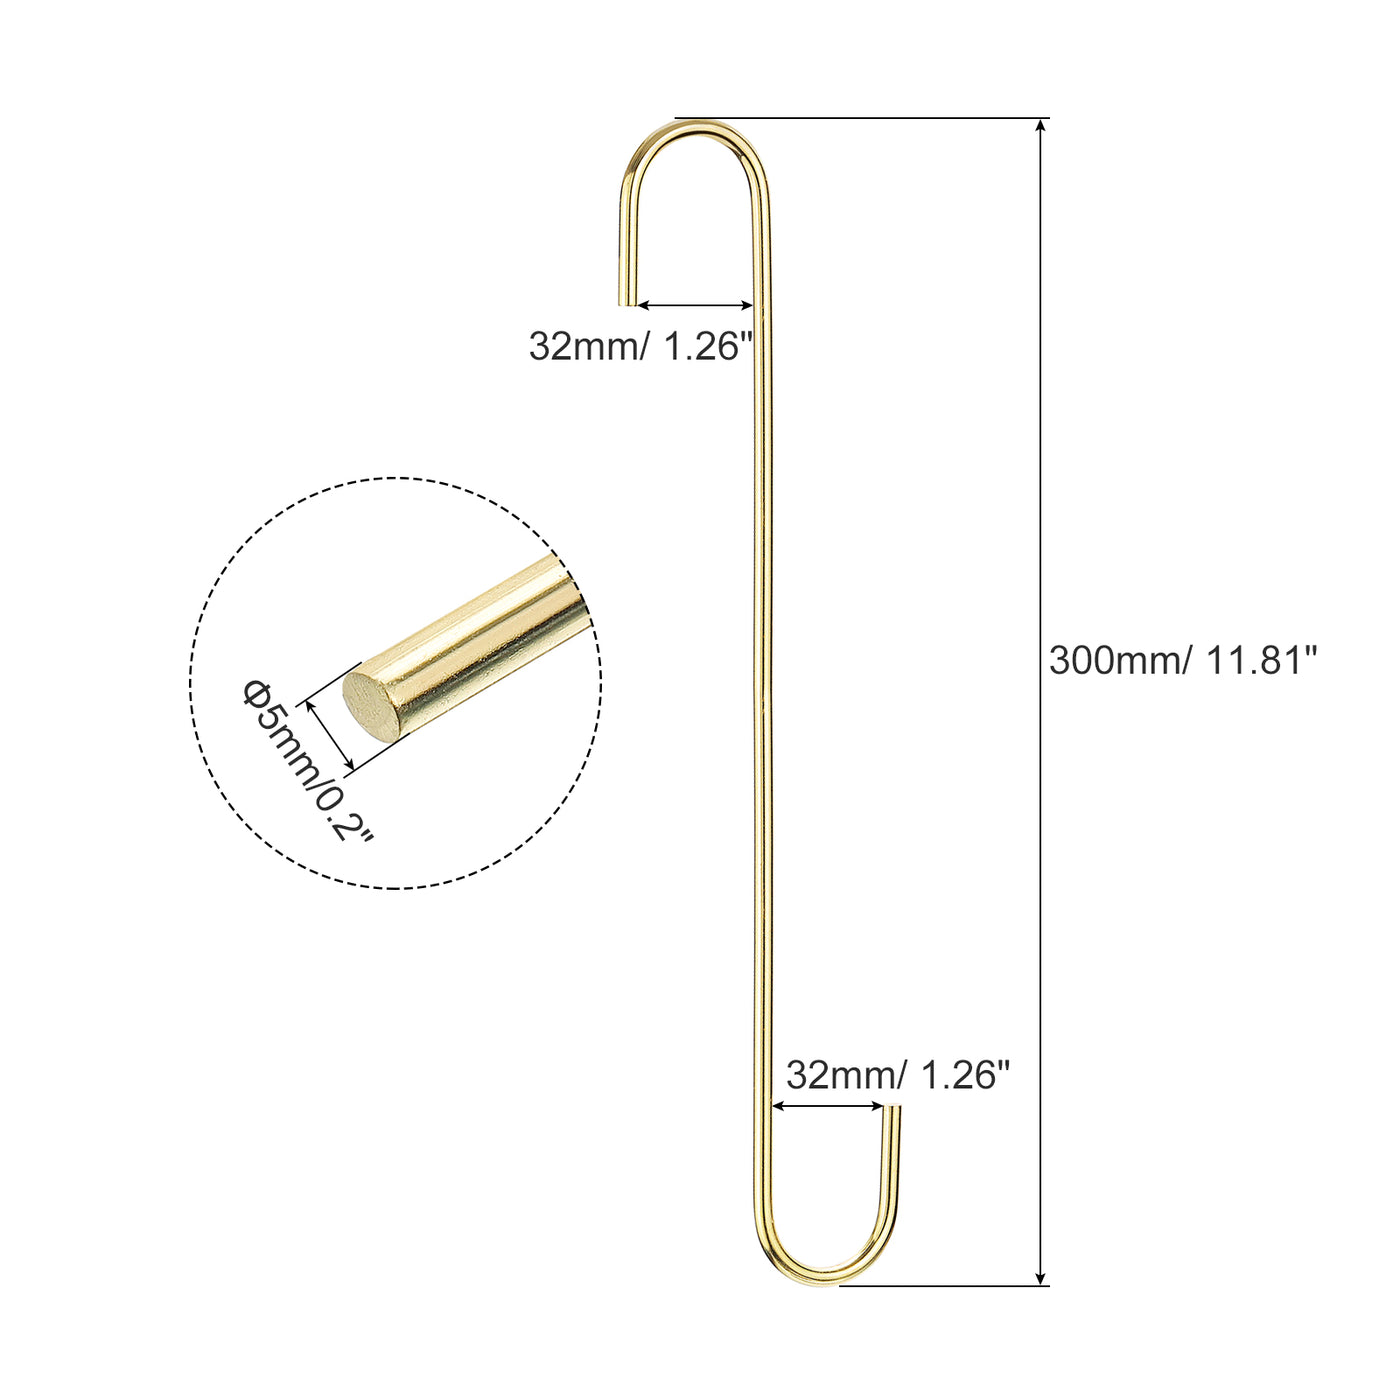 uxcell Uxcell S Hanging Hooks, 12inch(300mm) Extra Long Steel Hanger, Indoor Outdoor Uses for Garden, Bathroom, Closet, Workshop, Kitchen, Gold Tone, 5Pcs